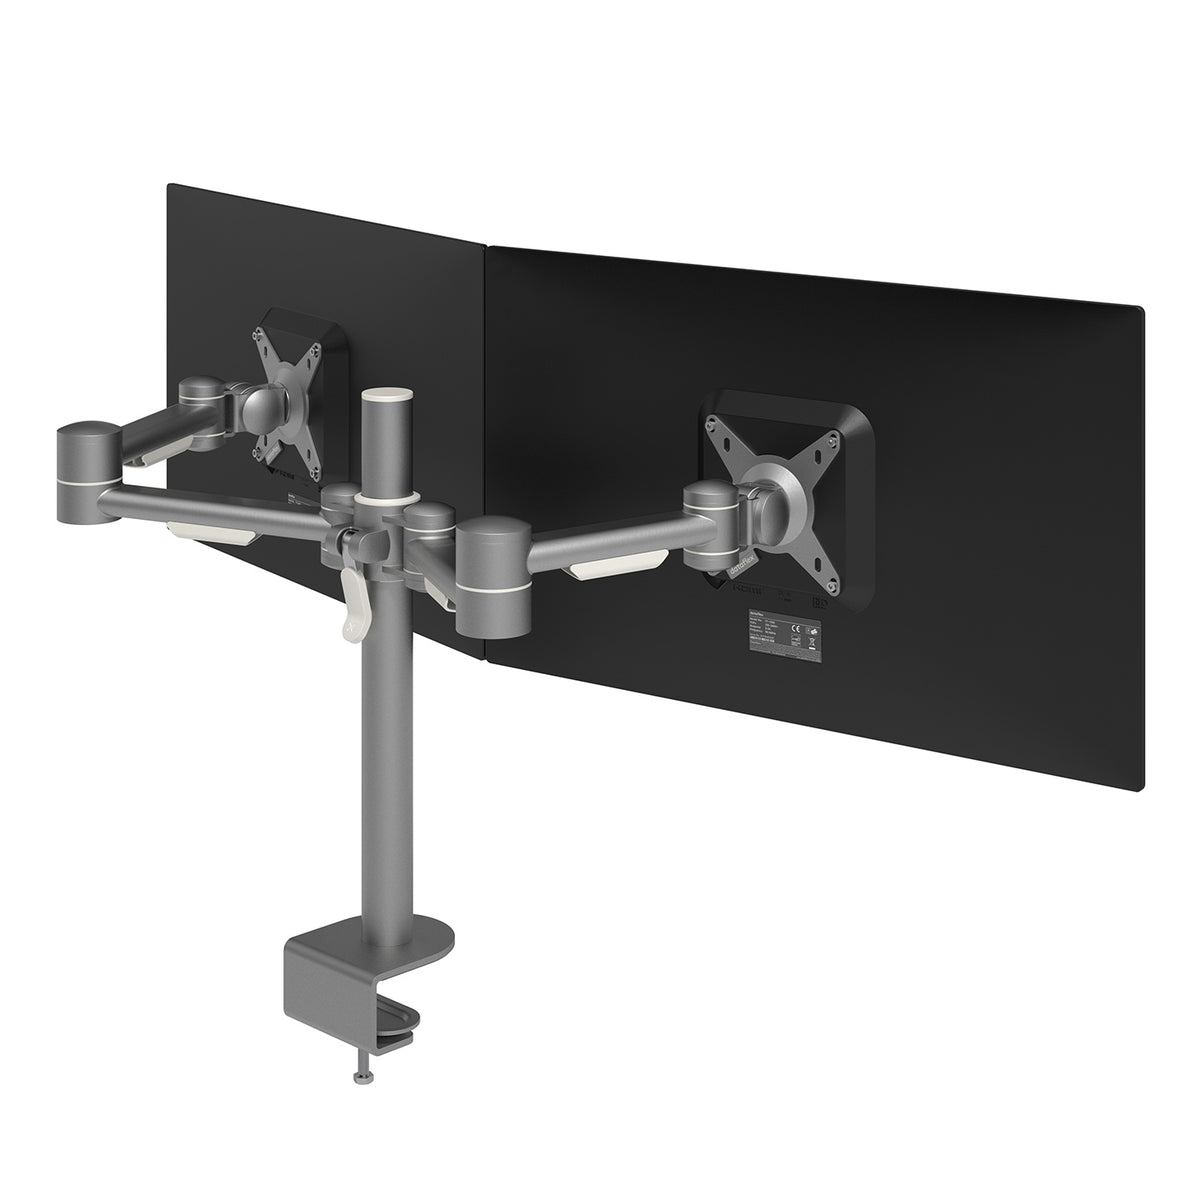 Viewmate monitor arm - desk 632